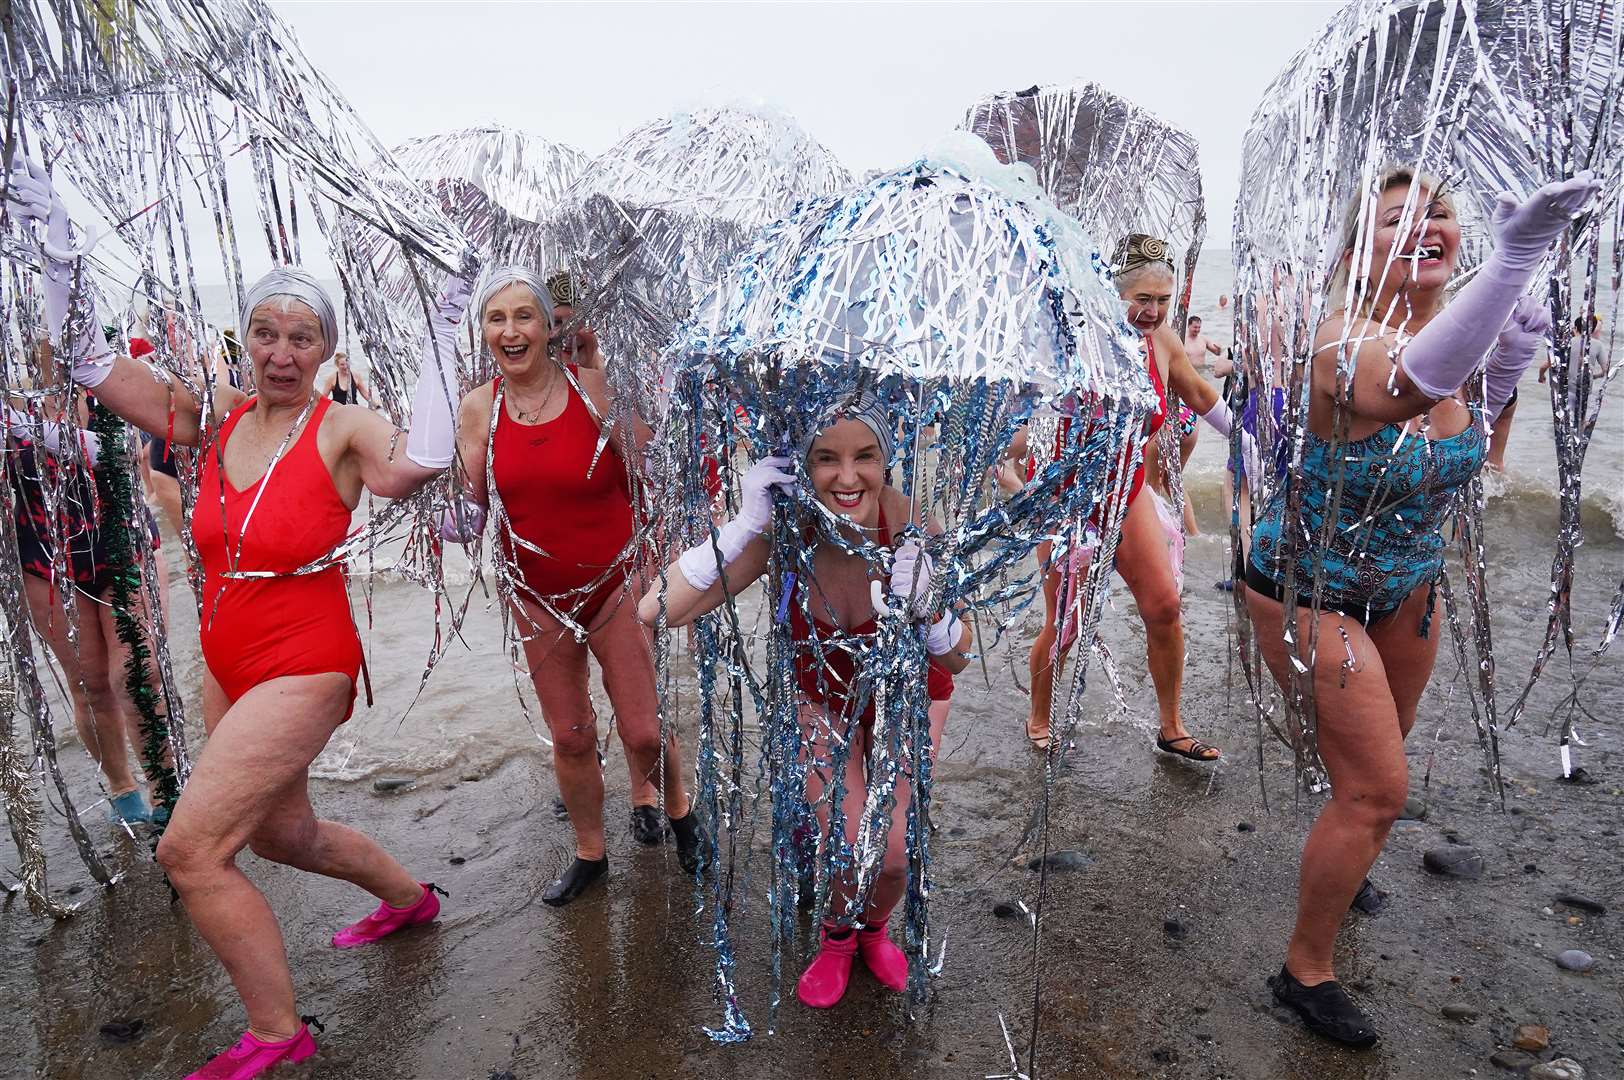 Members of the Bray Beach Bathers leave the water after taking part in the annual New Year’s Day charity swim in Co Wicklow (Brian Lawless/PA)